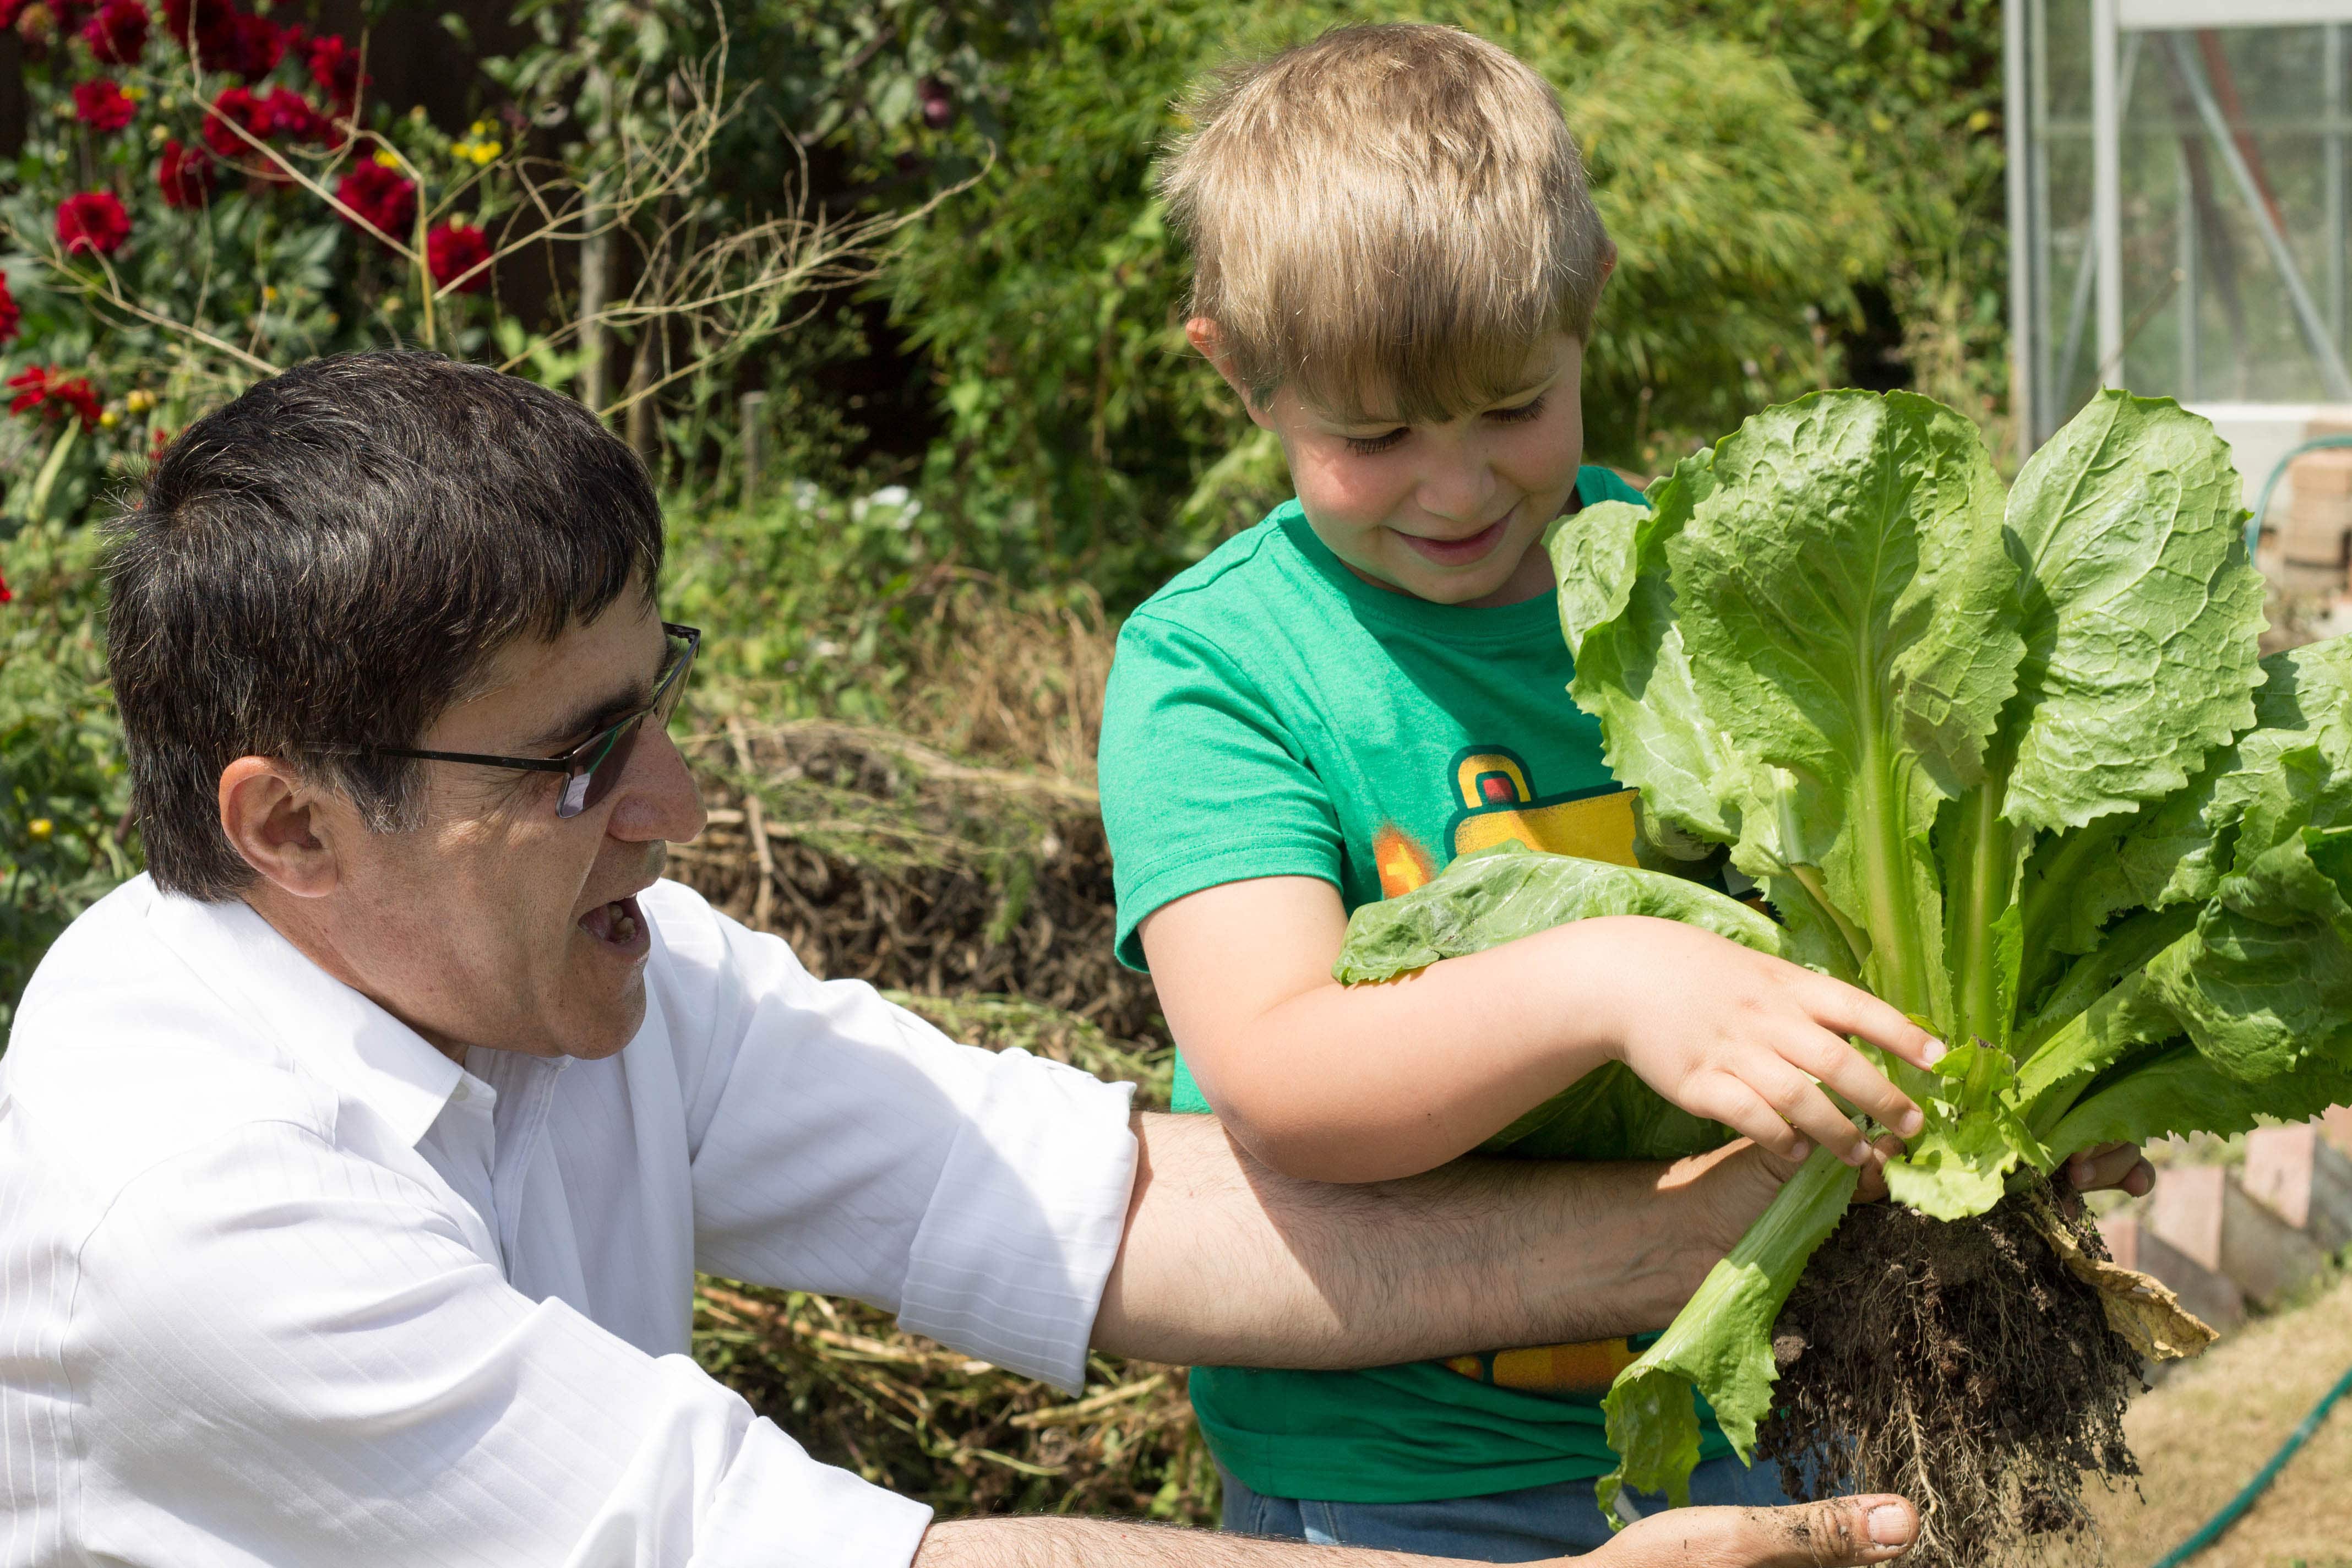 A man and a boy holding escarole leaves in a garden